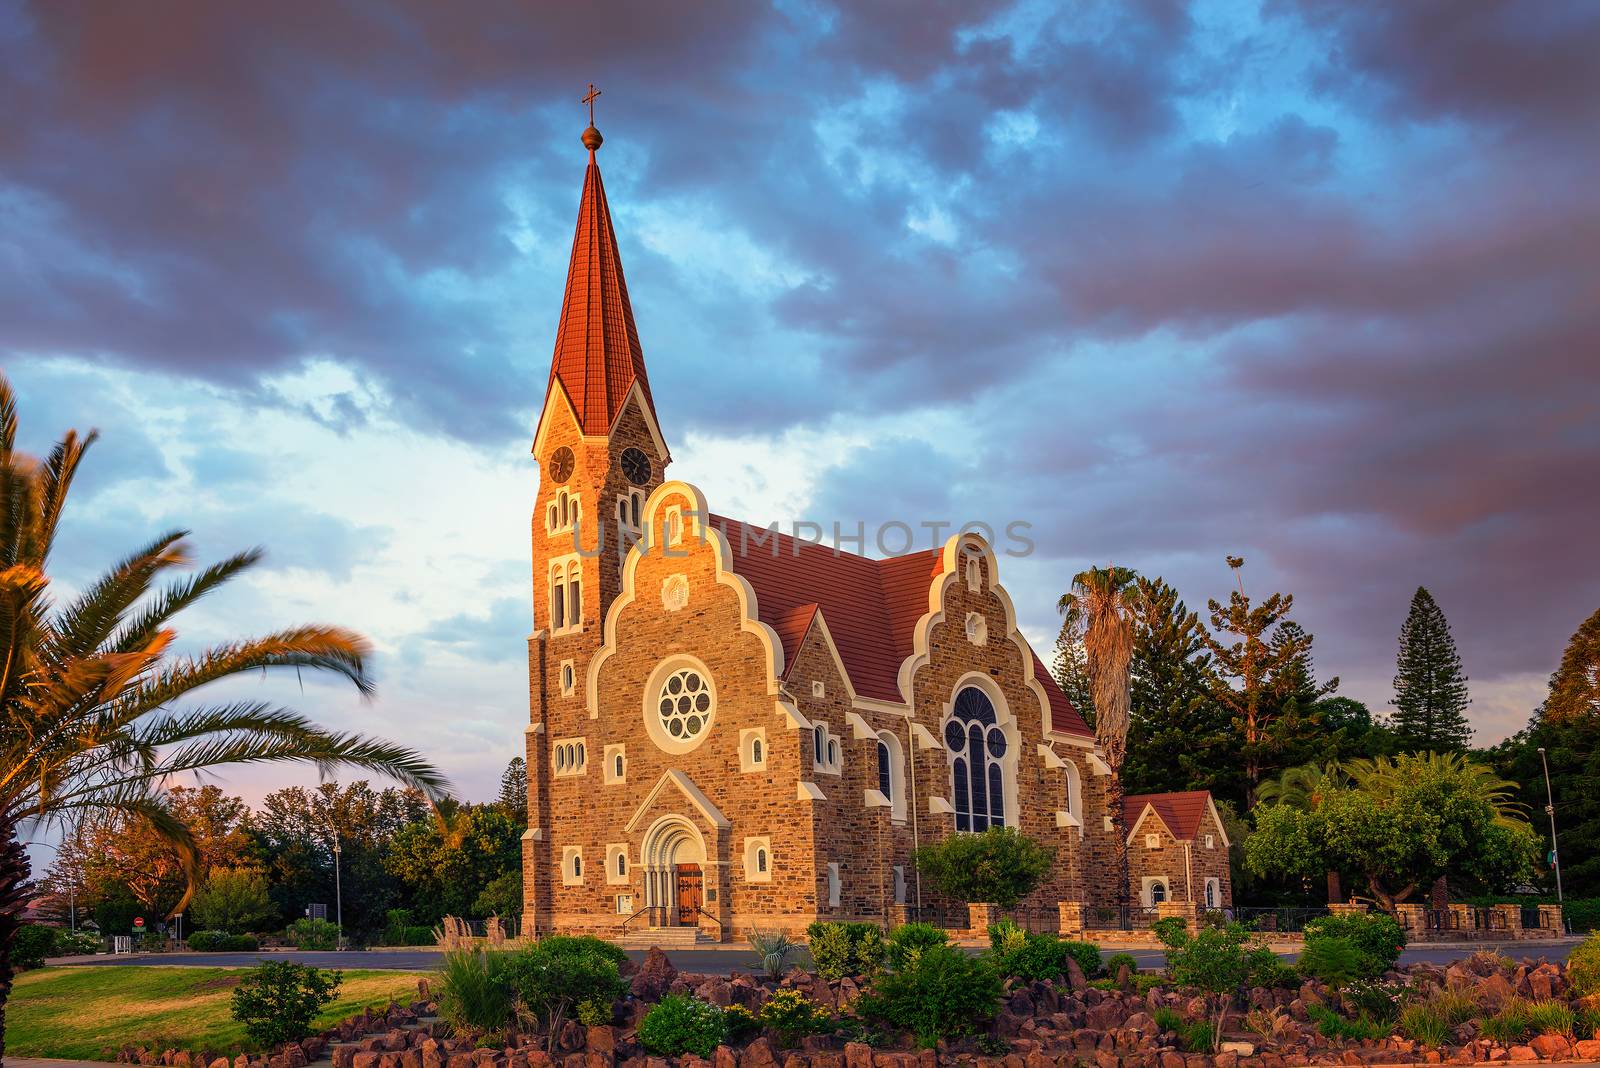 Sunset above Christchurch, a historic lutheran church in Windhoek, Namibia by nickfox